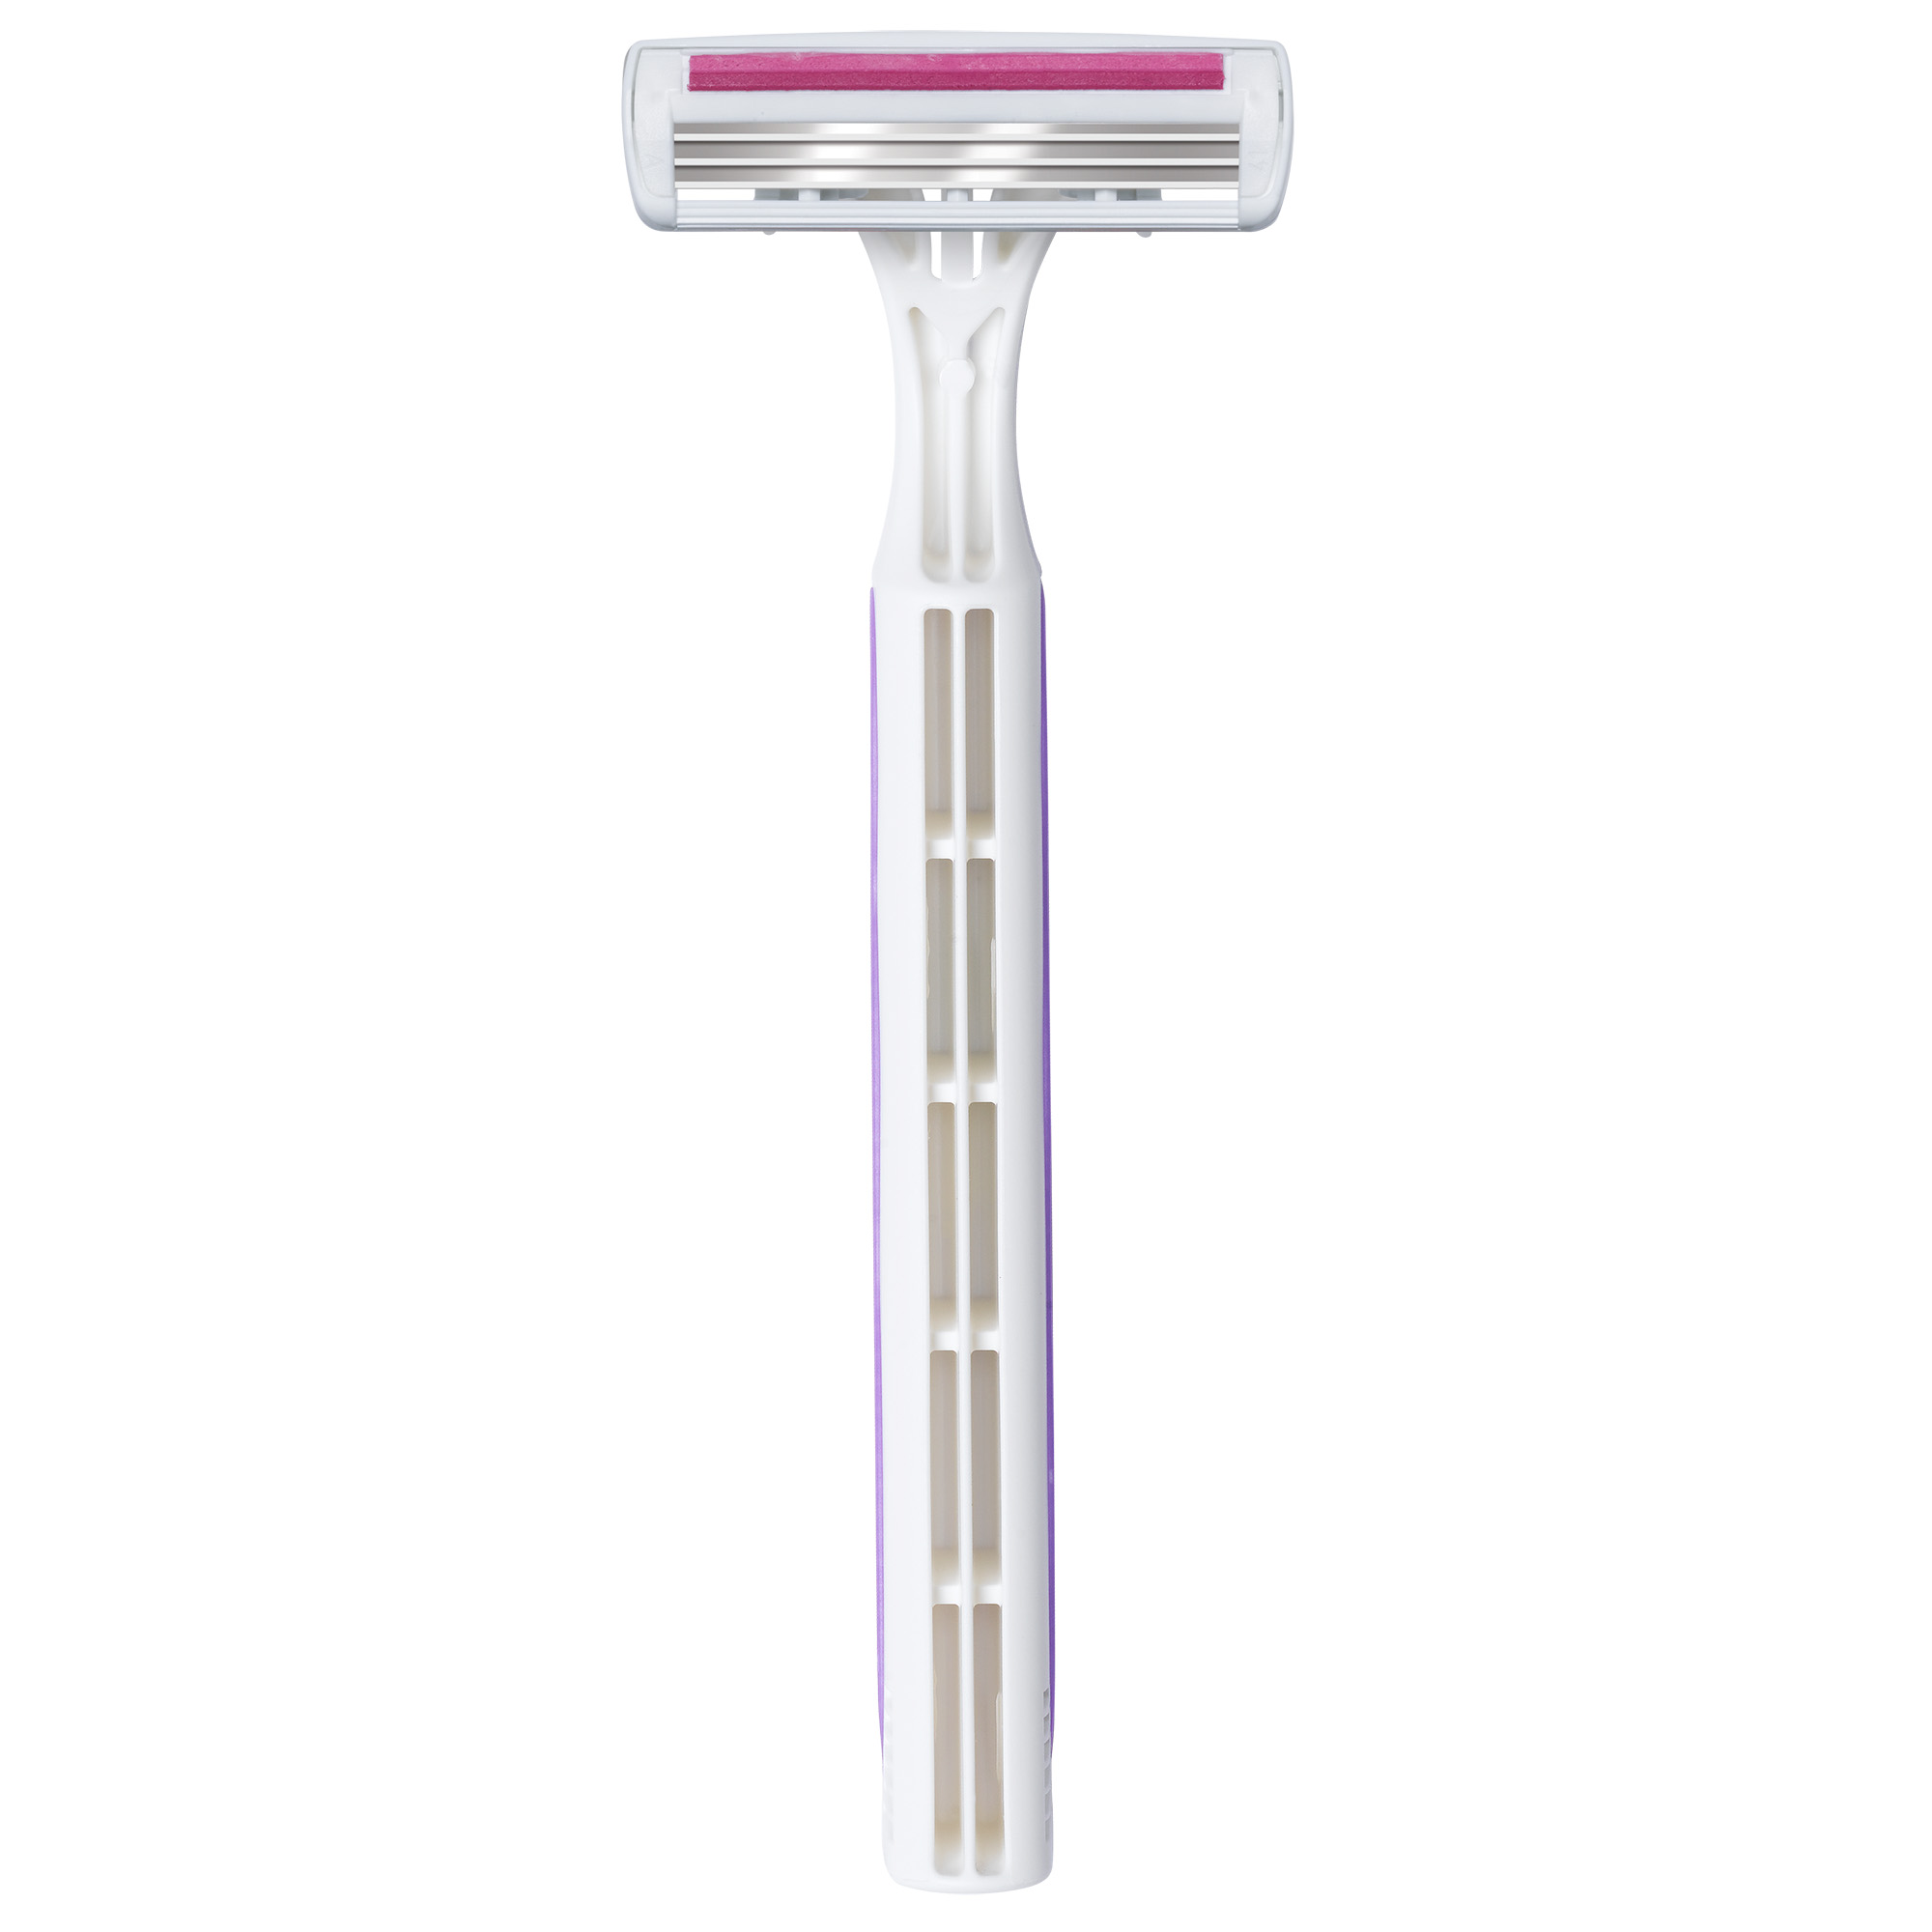 Silky Touch BIC 3, Triple Blade Women's Razor Shaver, 4 Count - image 3 of 8